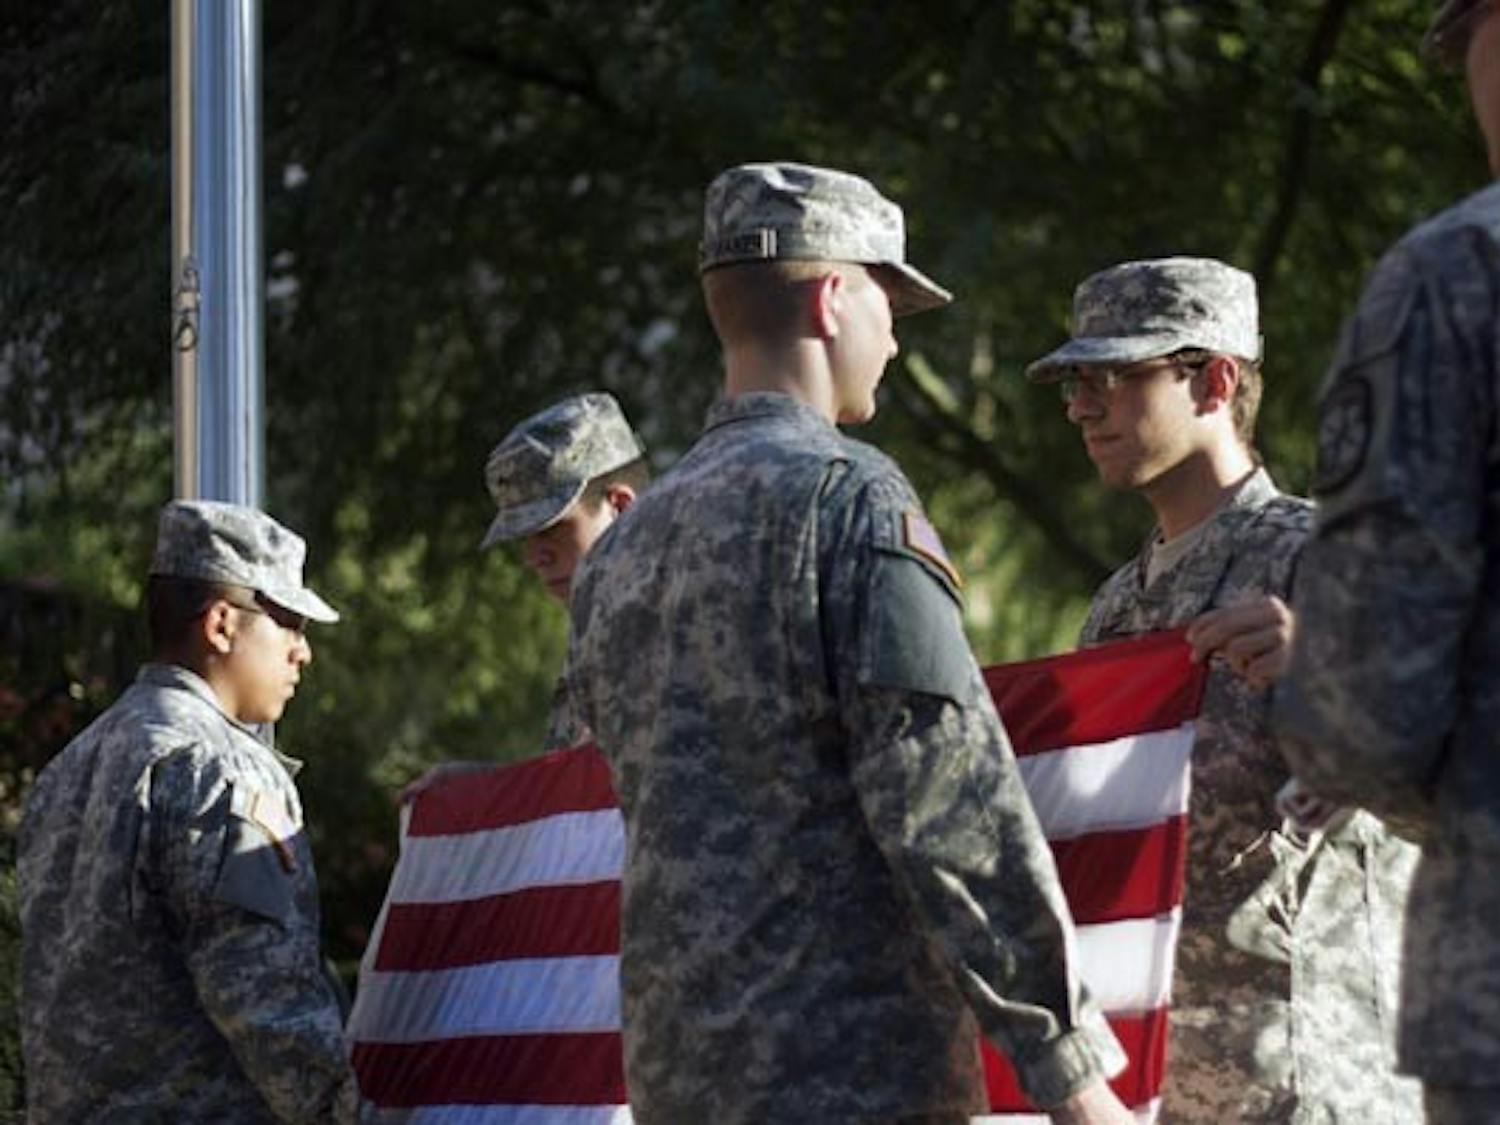 Members of the ROTC color guard take down the American flag in front of the Social Sciences building in Tempe, Arizona on Thursday, Oct. 14, 2010.